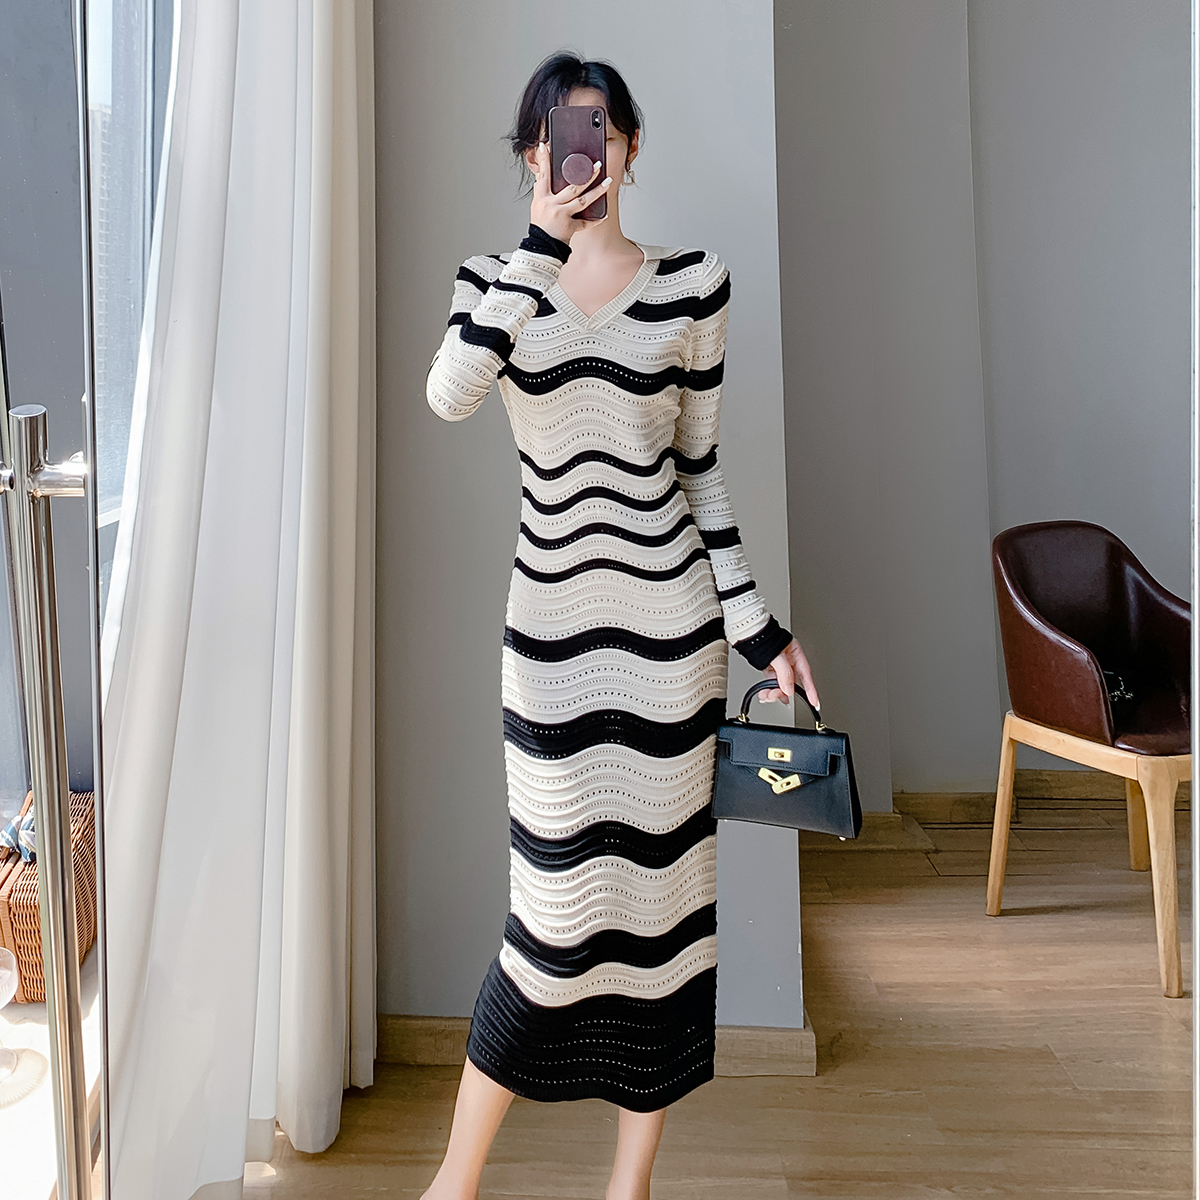 Autumn and winter pinched waist dress for women